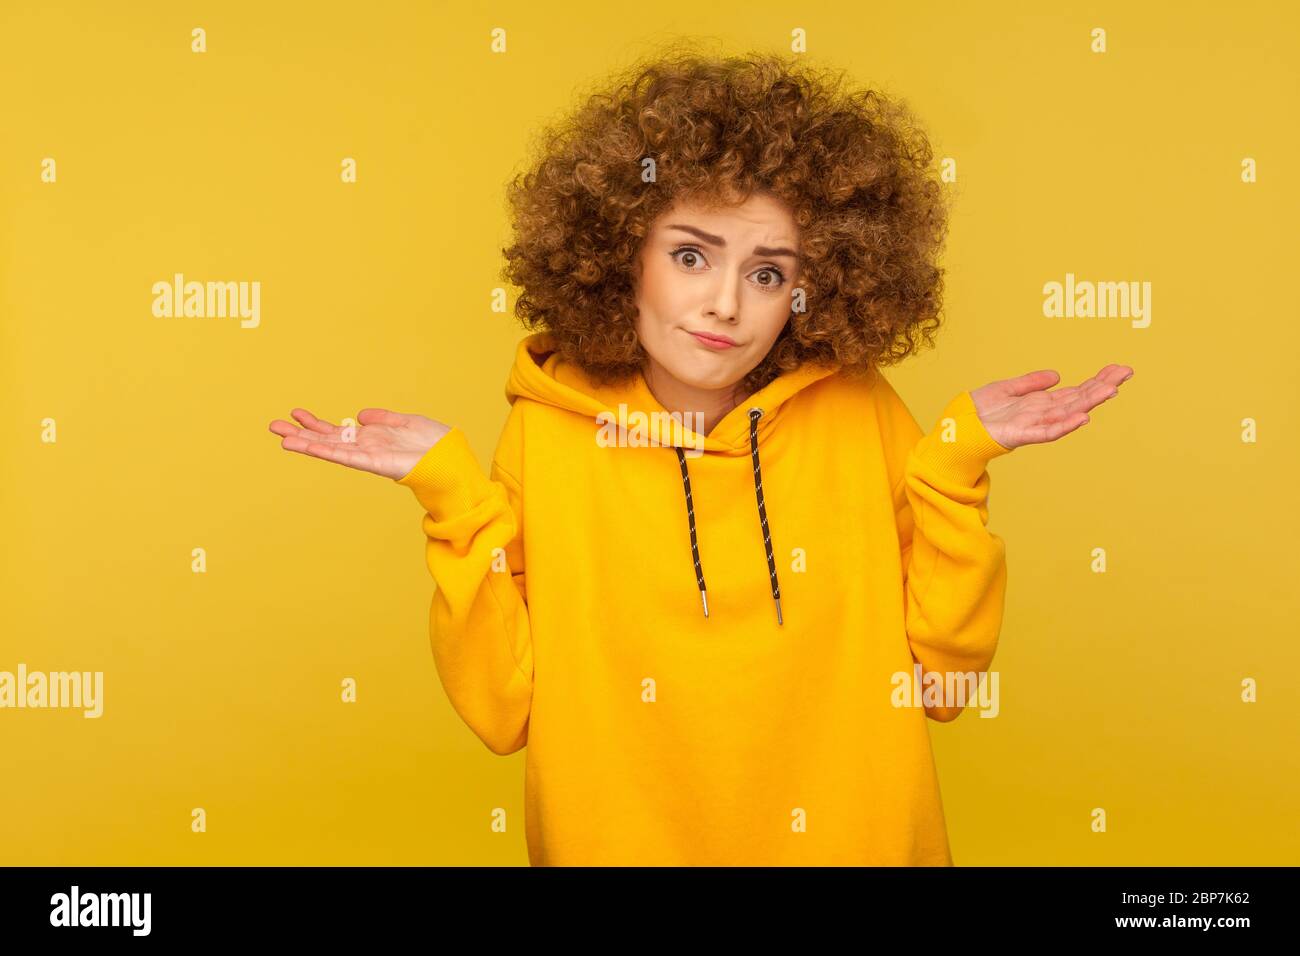 Don't know, sorry. Portrait of clueless uncertain confused curly-haired woman in urban style hoodie shrugging shoulders in questioning gesture, lookin Stock Photo